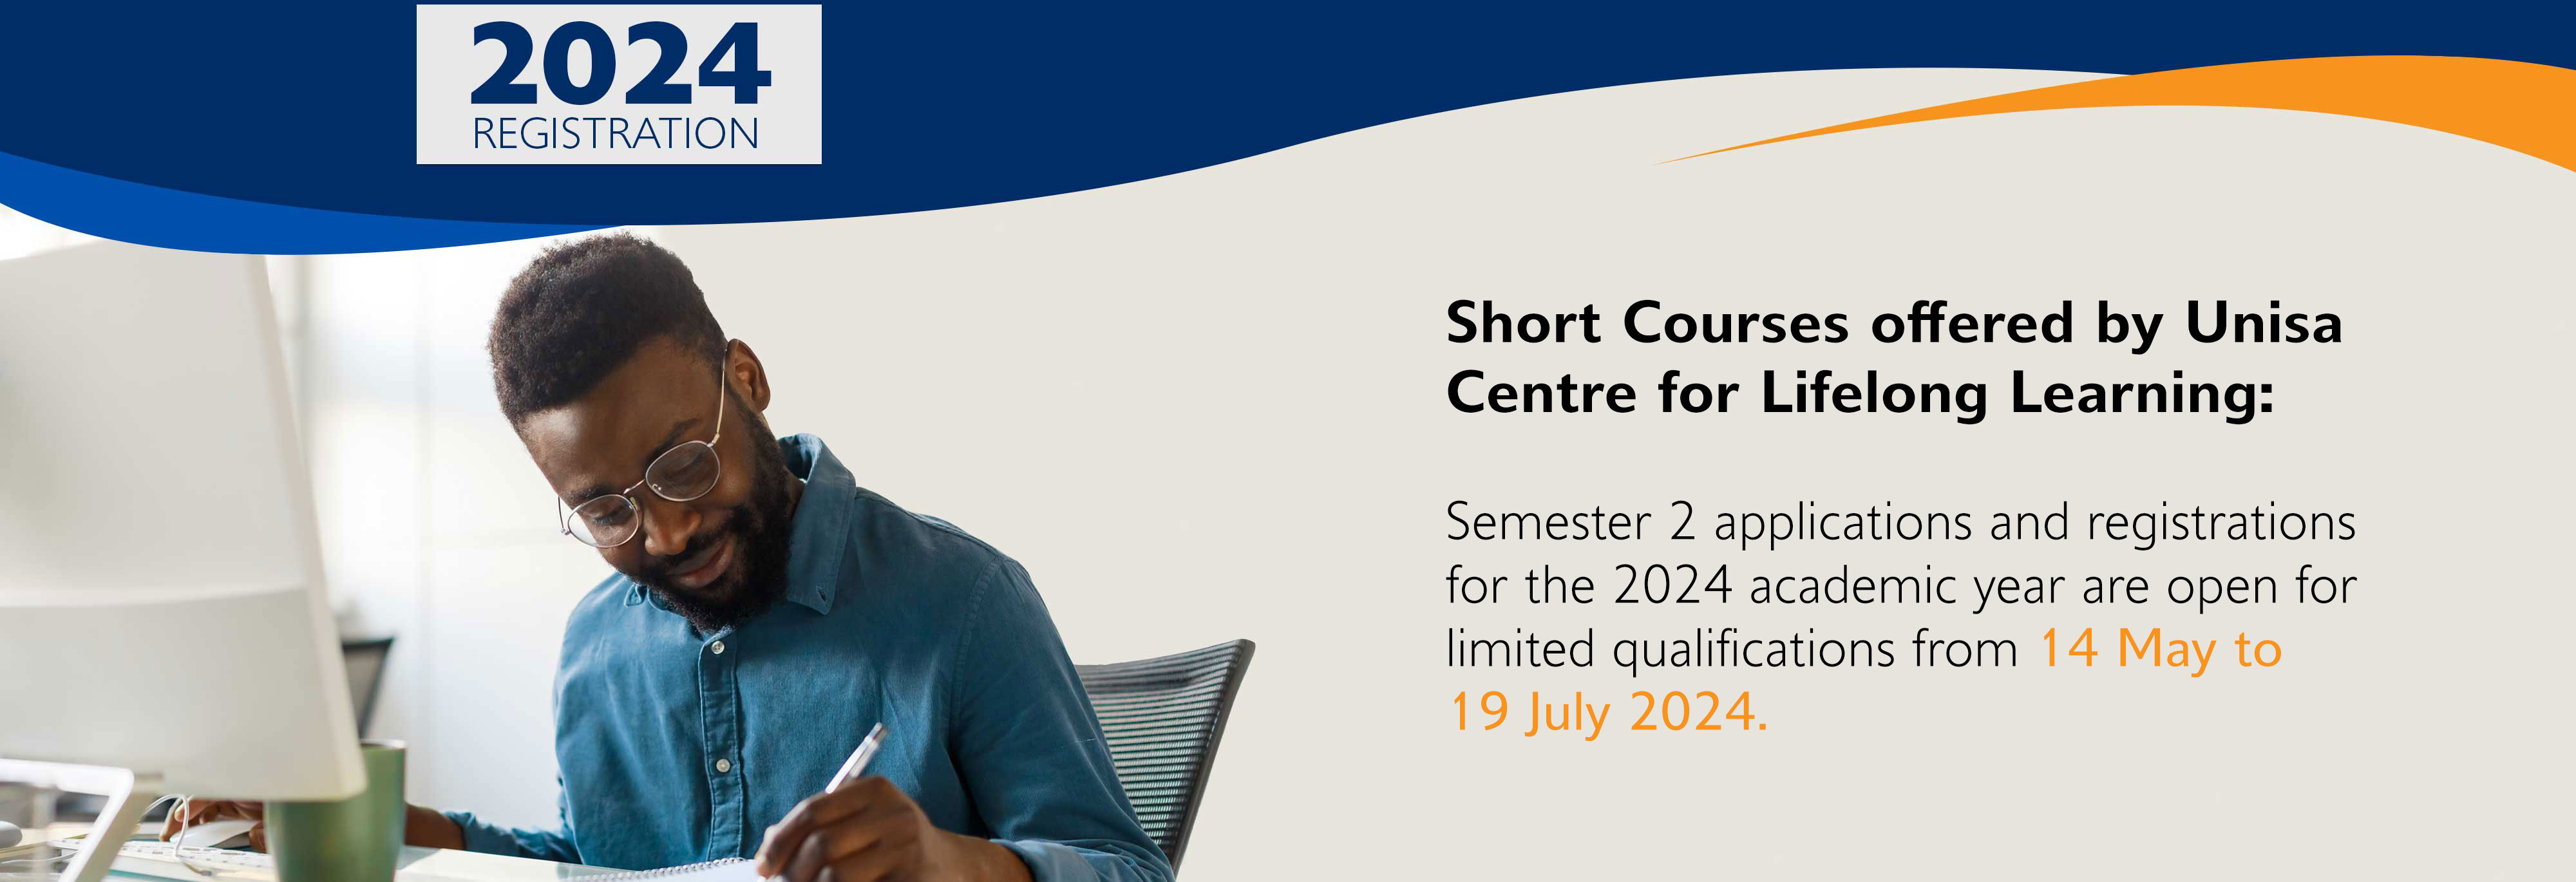 Short courses offered by Unisa Centre for Lifelong Learning